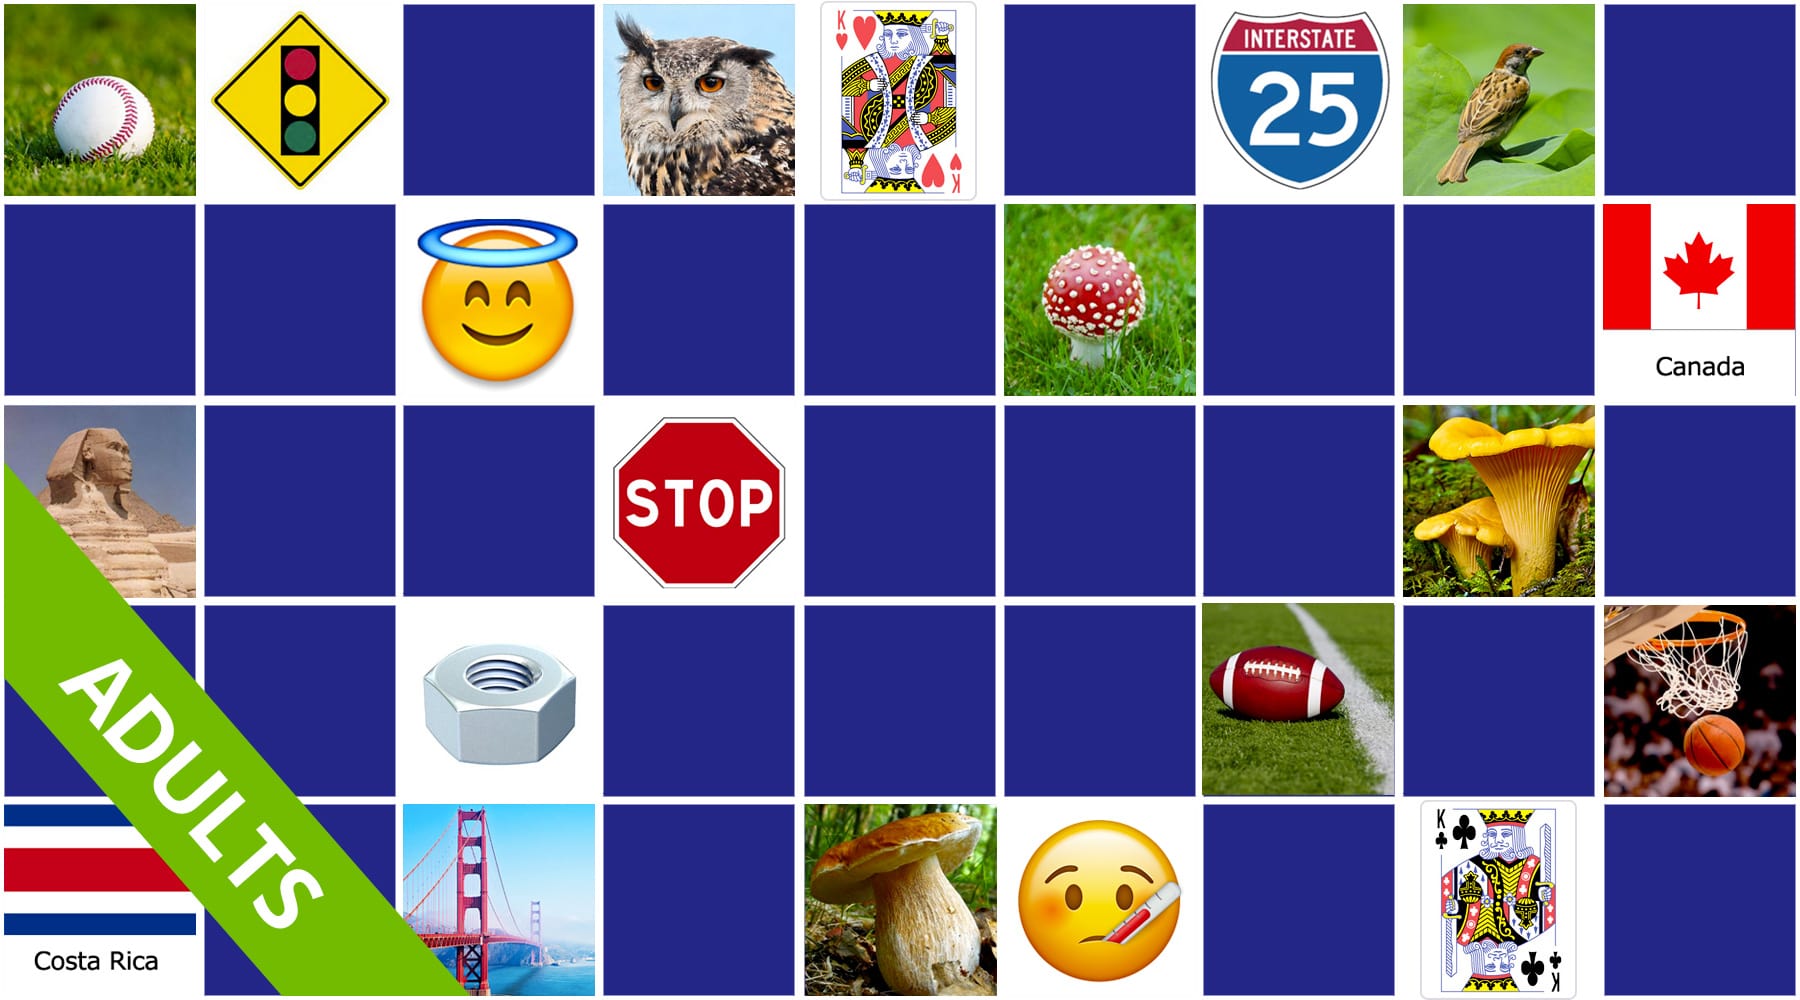 memory picture games for adults